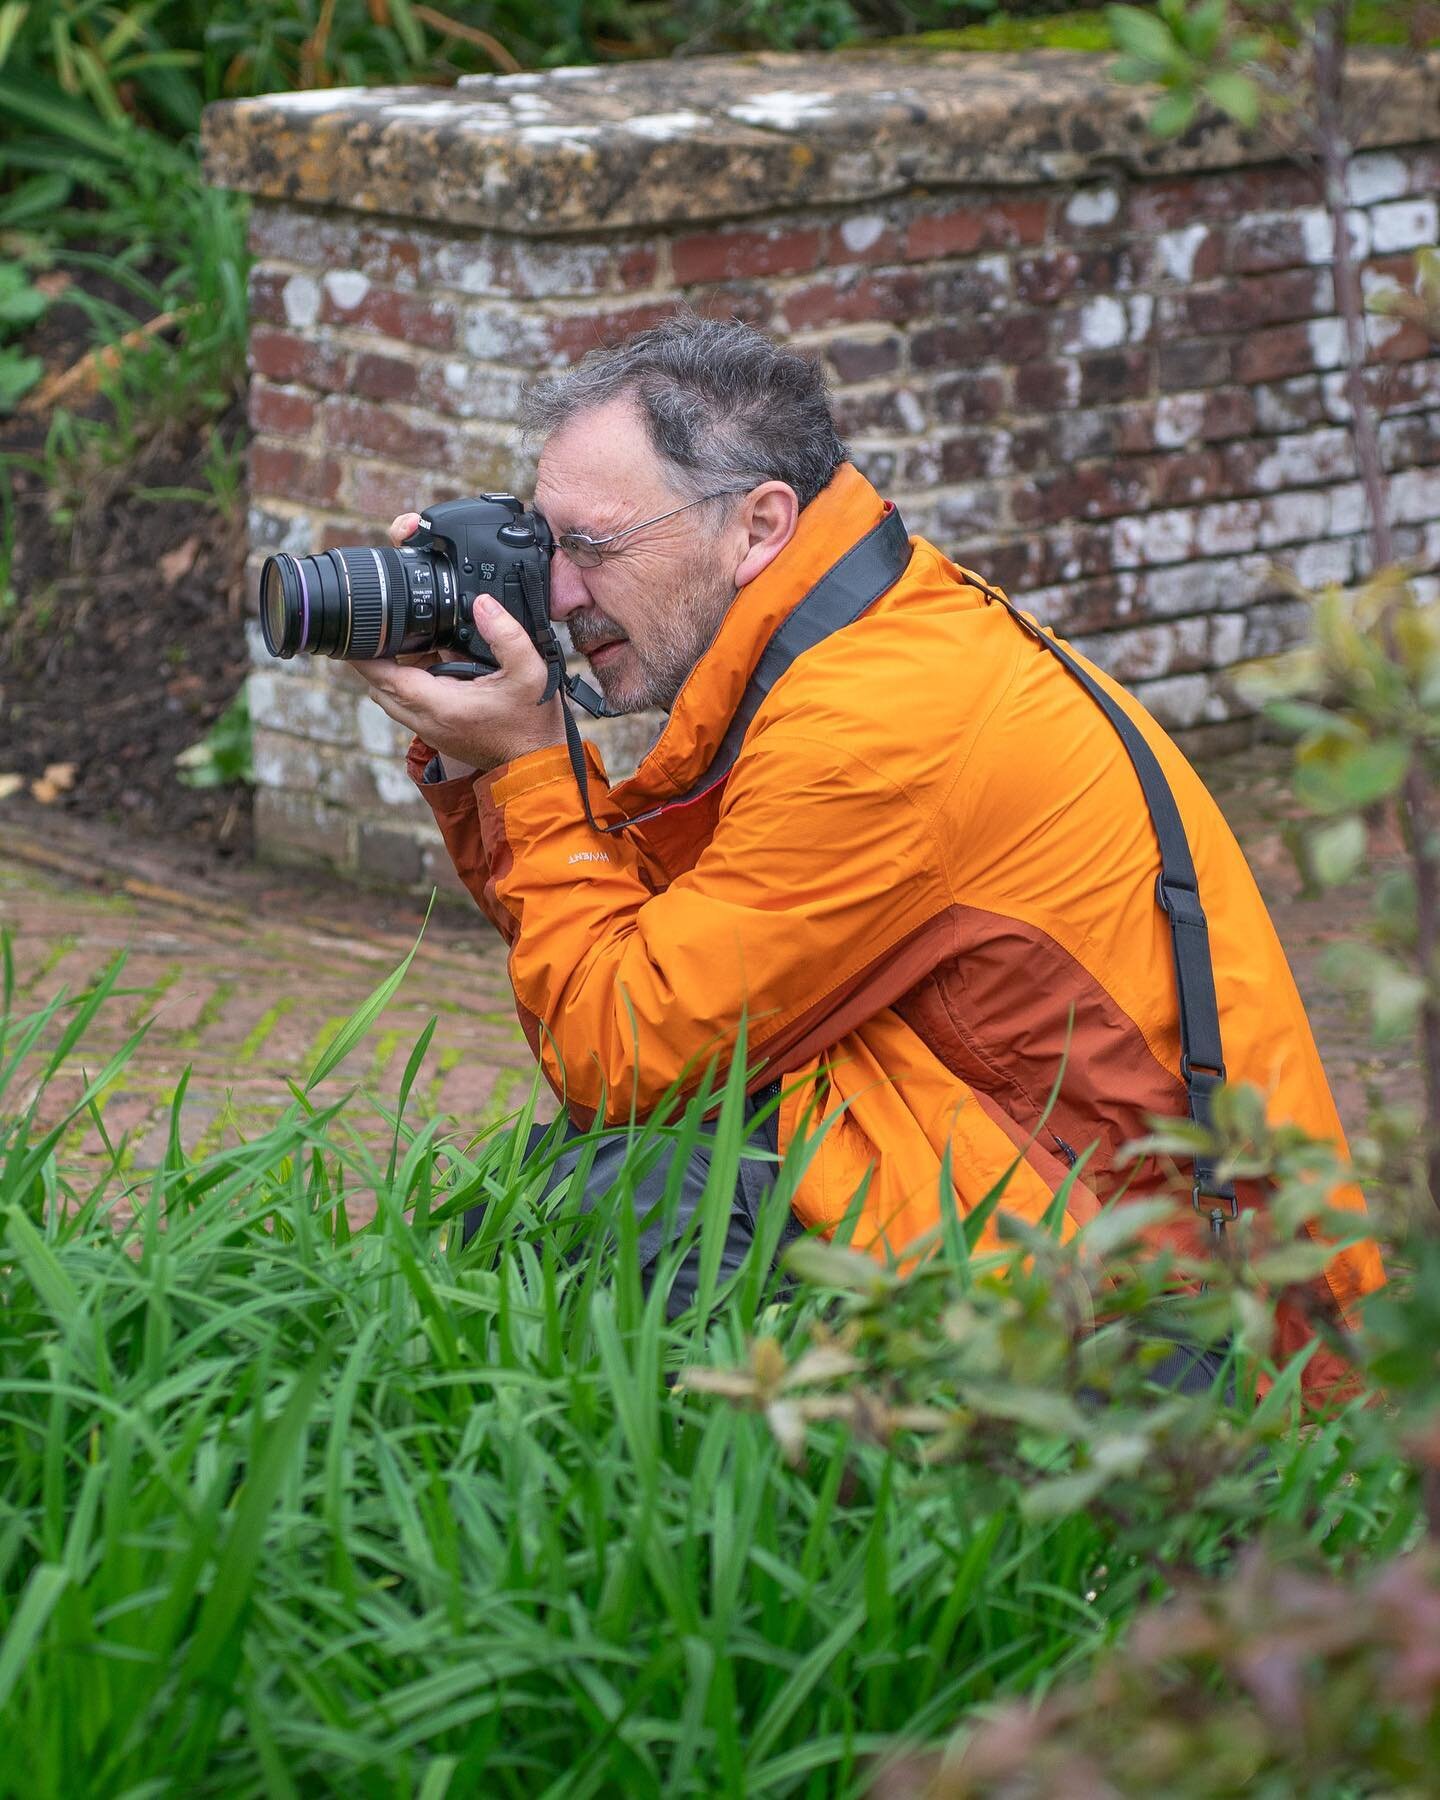 Yesterday was the first Photography Workshop, for The National Trust, held at Barrington Court, Somerset.
 
Following quickly on the heels of the closure of Dillington House, Somerset County Council education centre, a photography workshop was organi